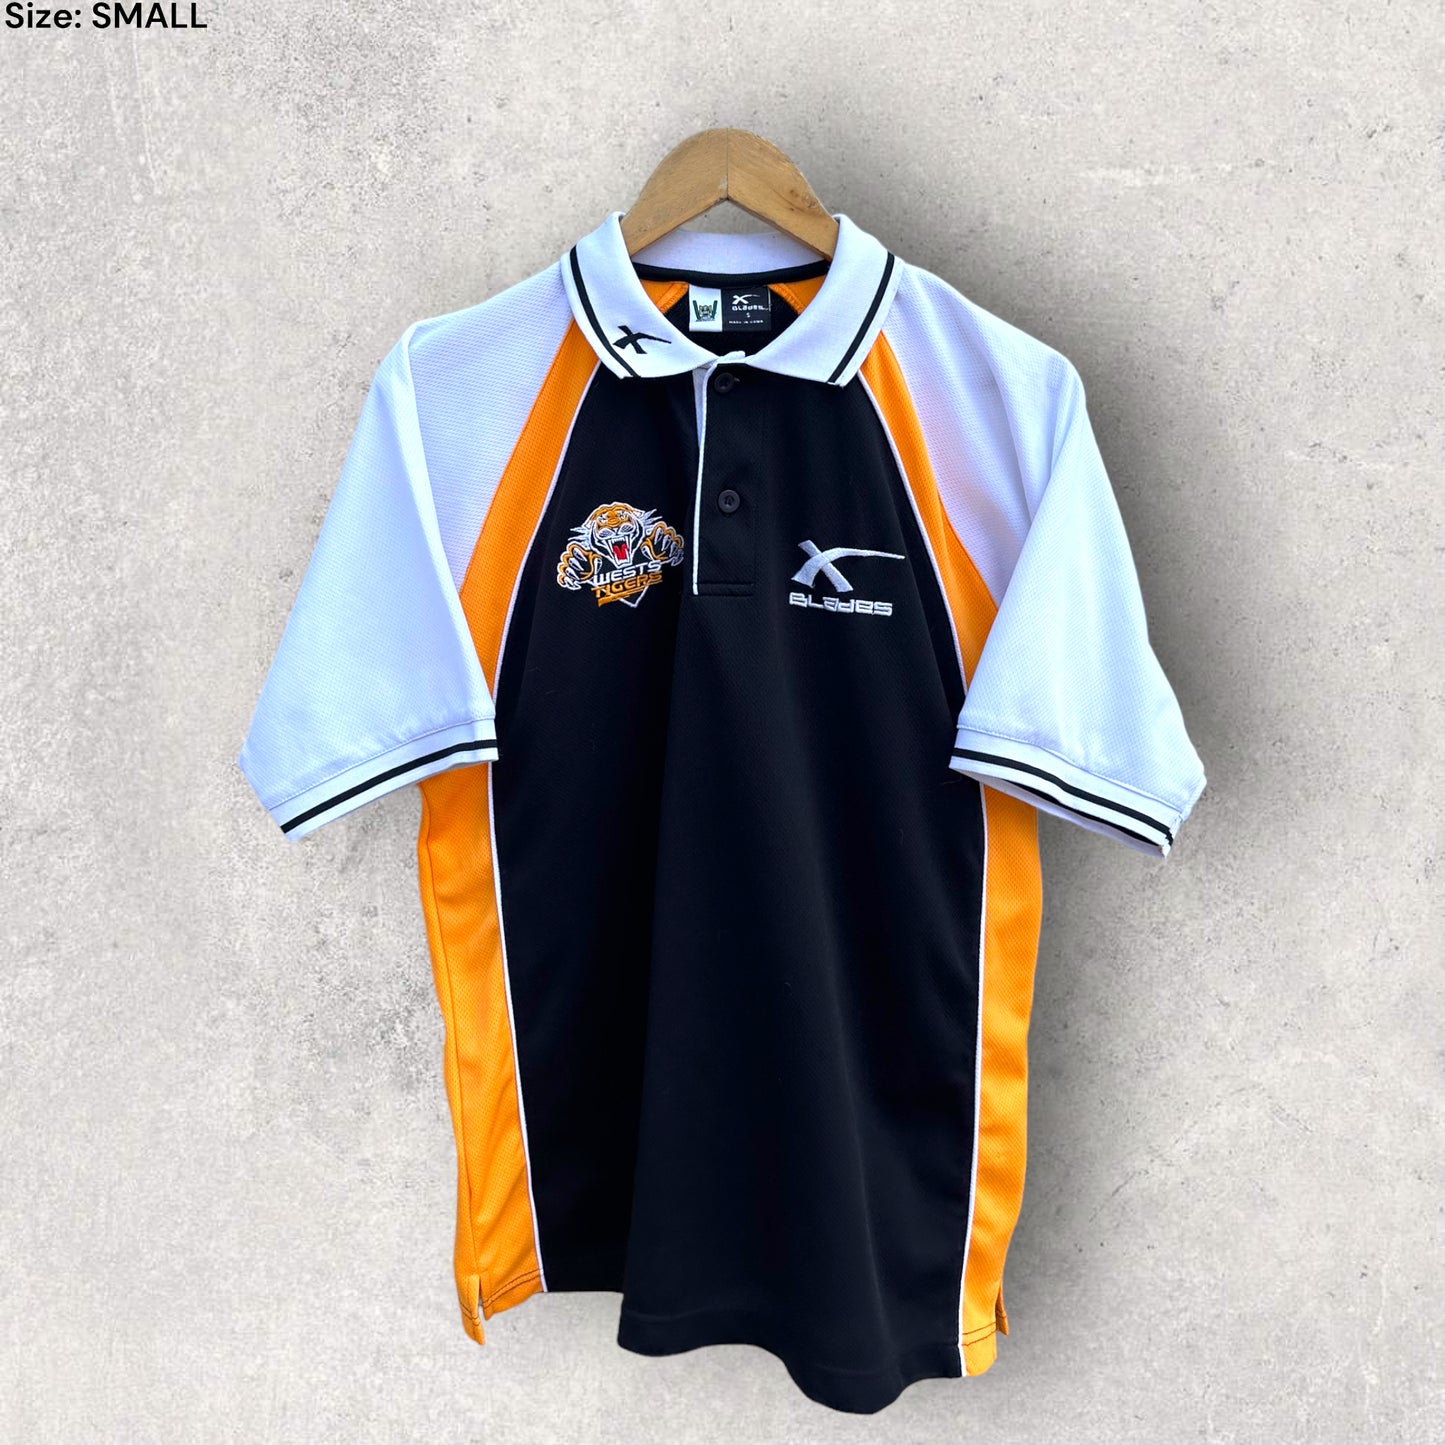 WESTS TIGERS X-BLADES POLO SHIRT